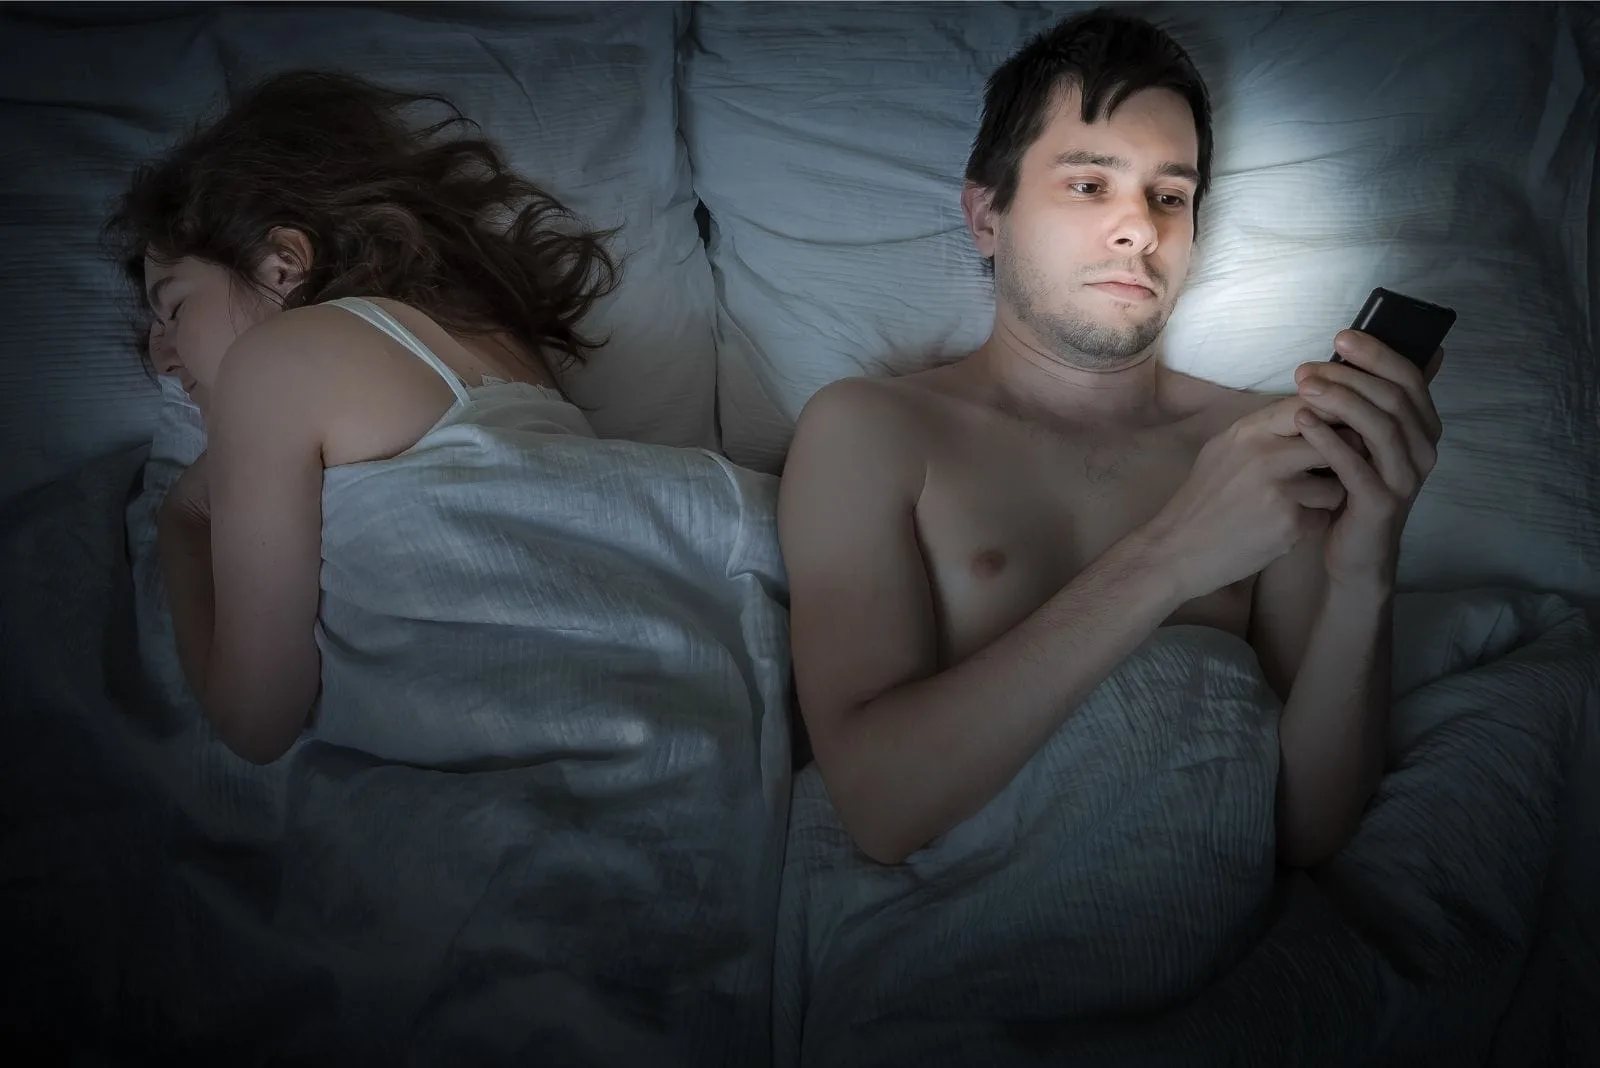 cheating man reading messages from his cellphone while lying down on bed beside his sleeping wife